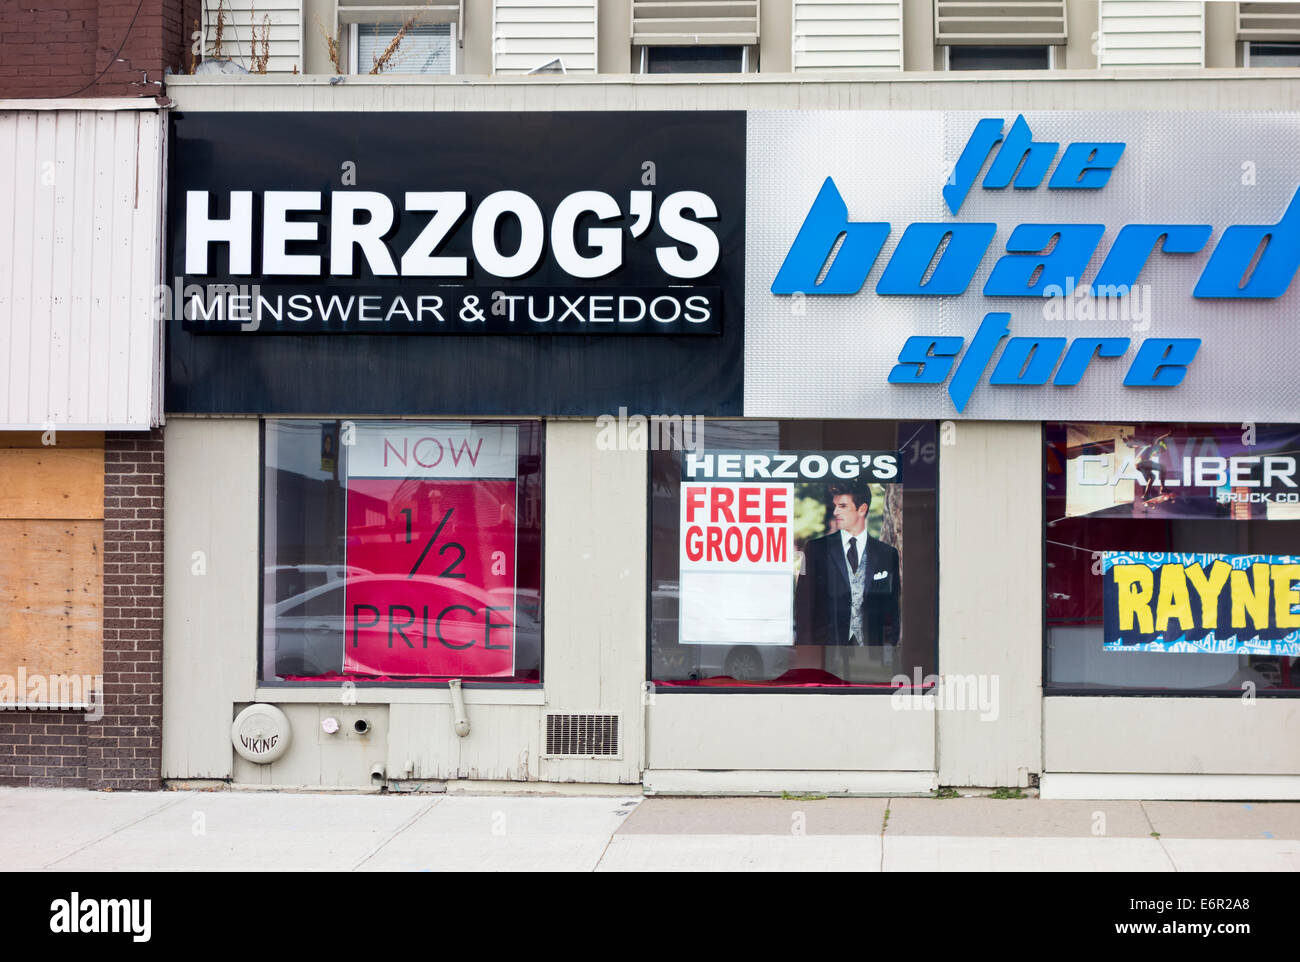 Men's clothing store, with a sign advertising a Free Groom.  Herzog's menswear store in St Catharines, Ontario Canada. Stock Photo